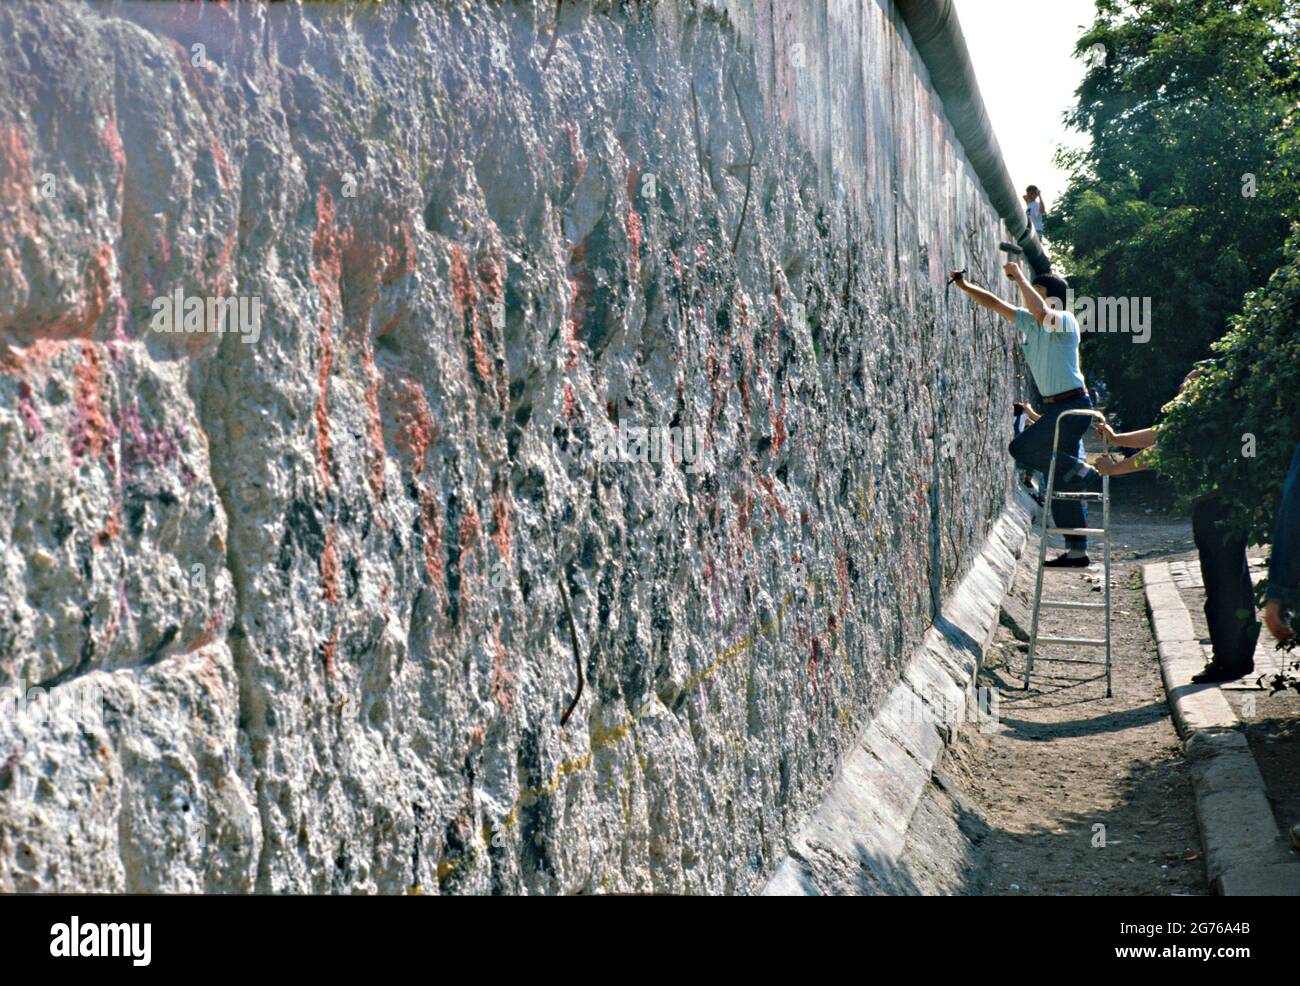 Berlin, Germany. 20 April 1990. Berlin Wall souvenir hunters known as Wallpeckers, chip away at a section of the Berlin Wall April 20, 1990 in West Berlin, West Germany. The wall separating East and West Germany came down November 9, 1989. Stock Photo